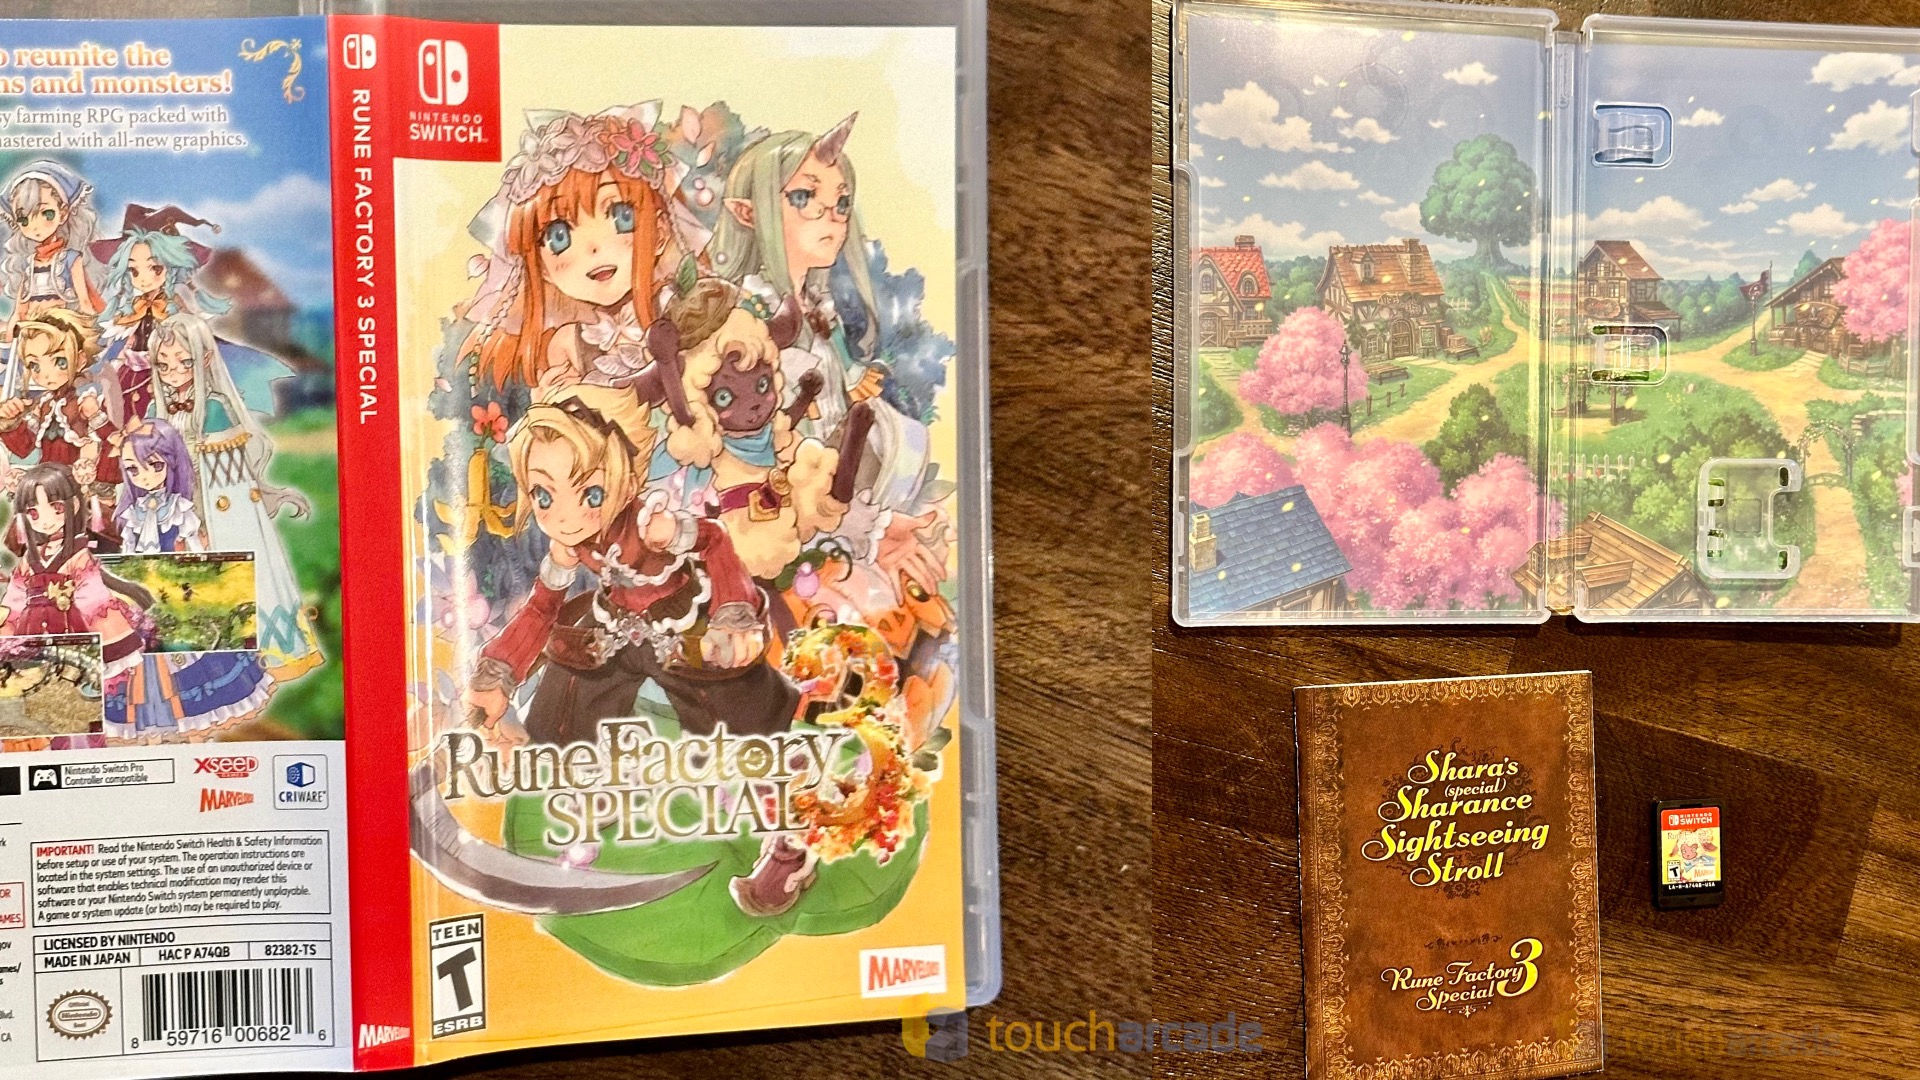 rune-factory-3-special-switch-physical.jpg